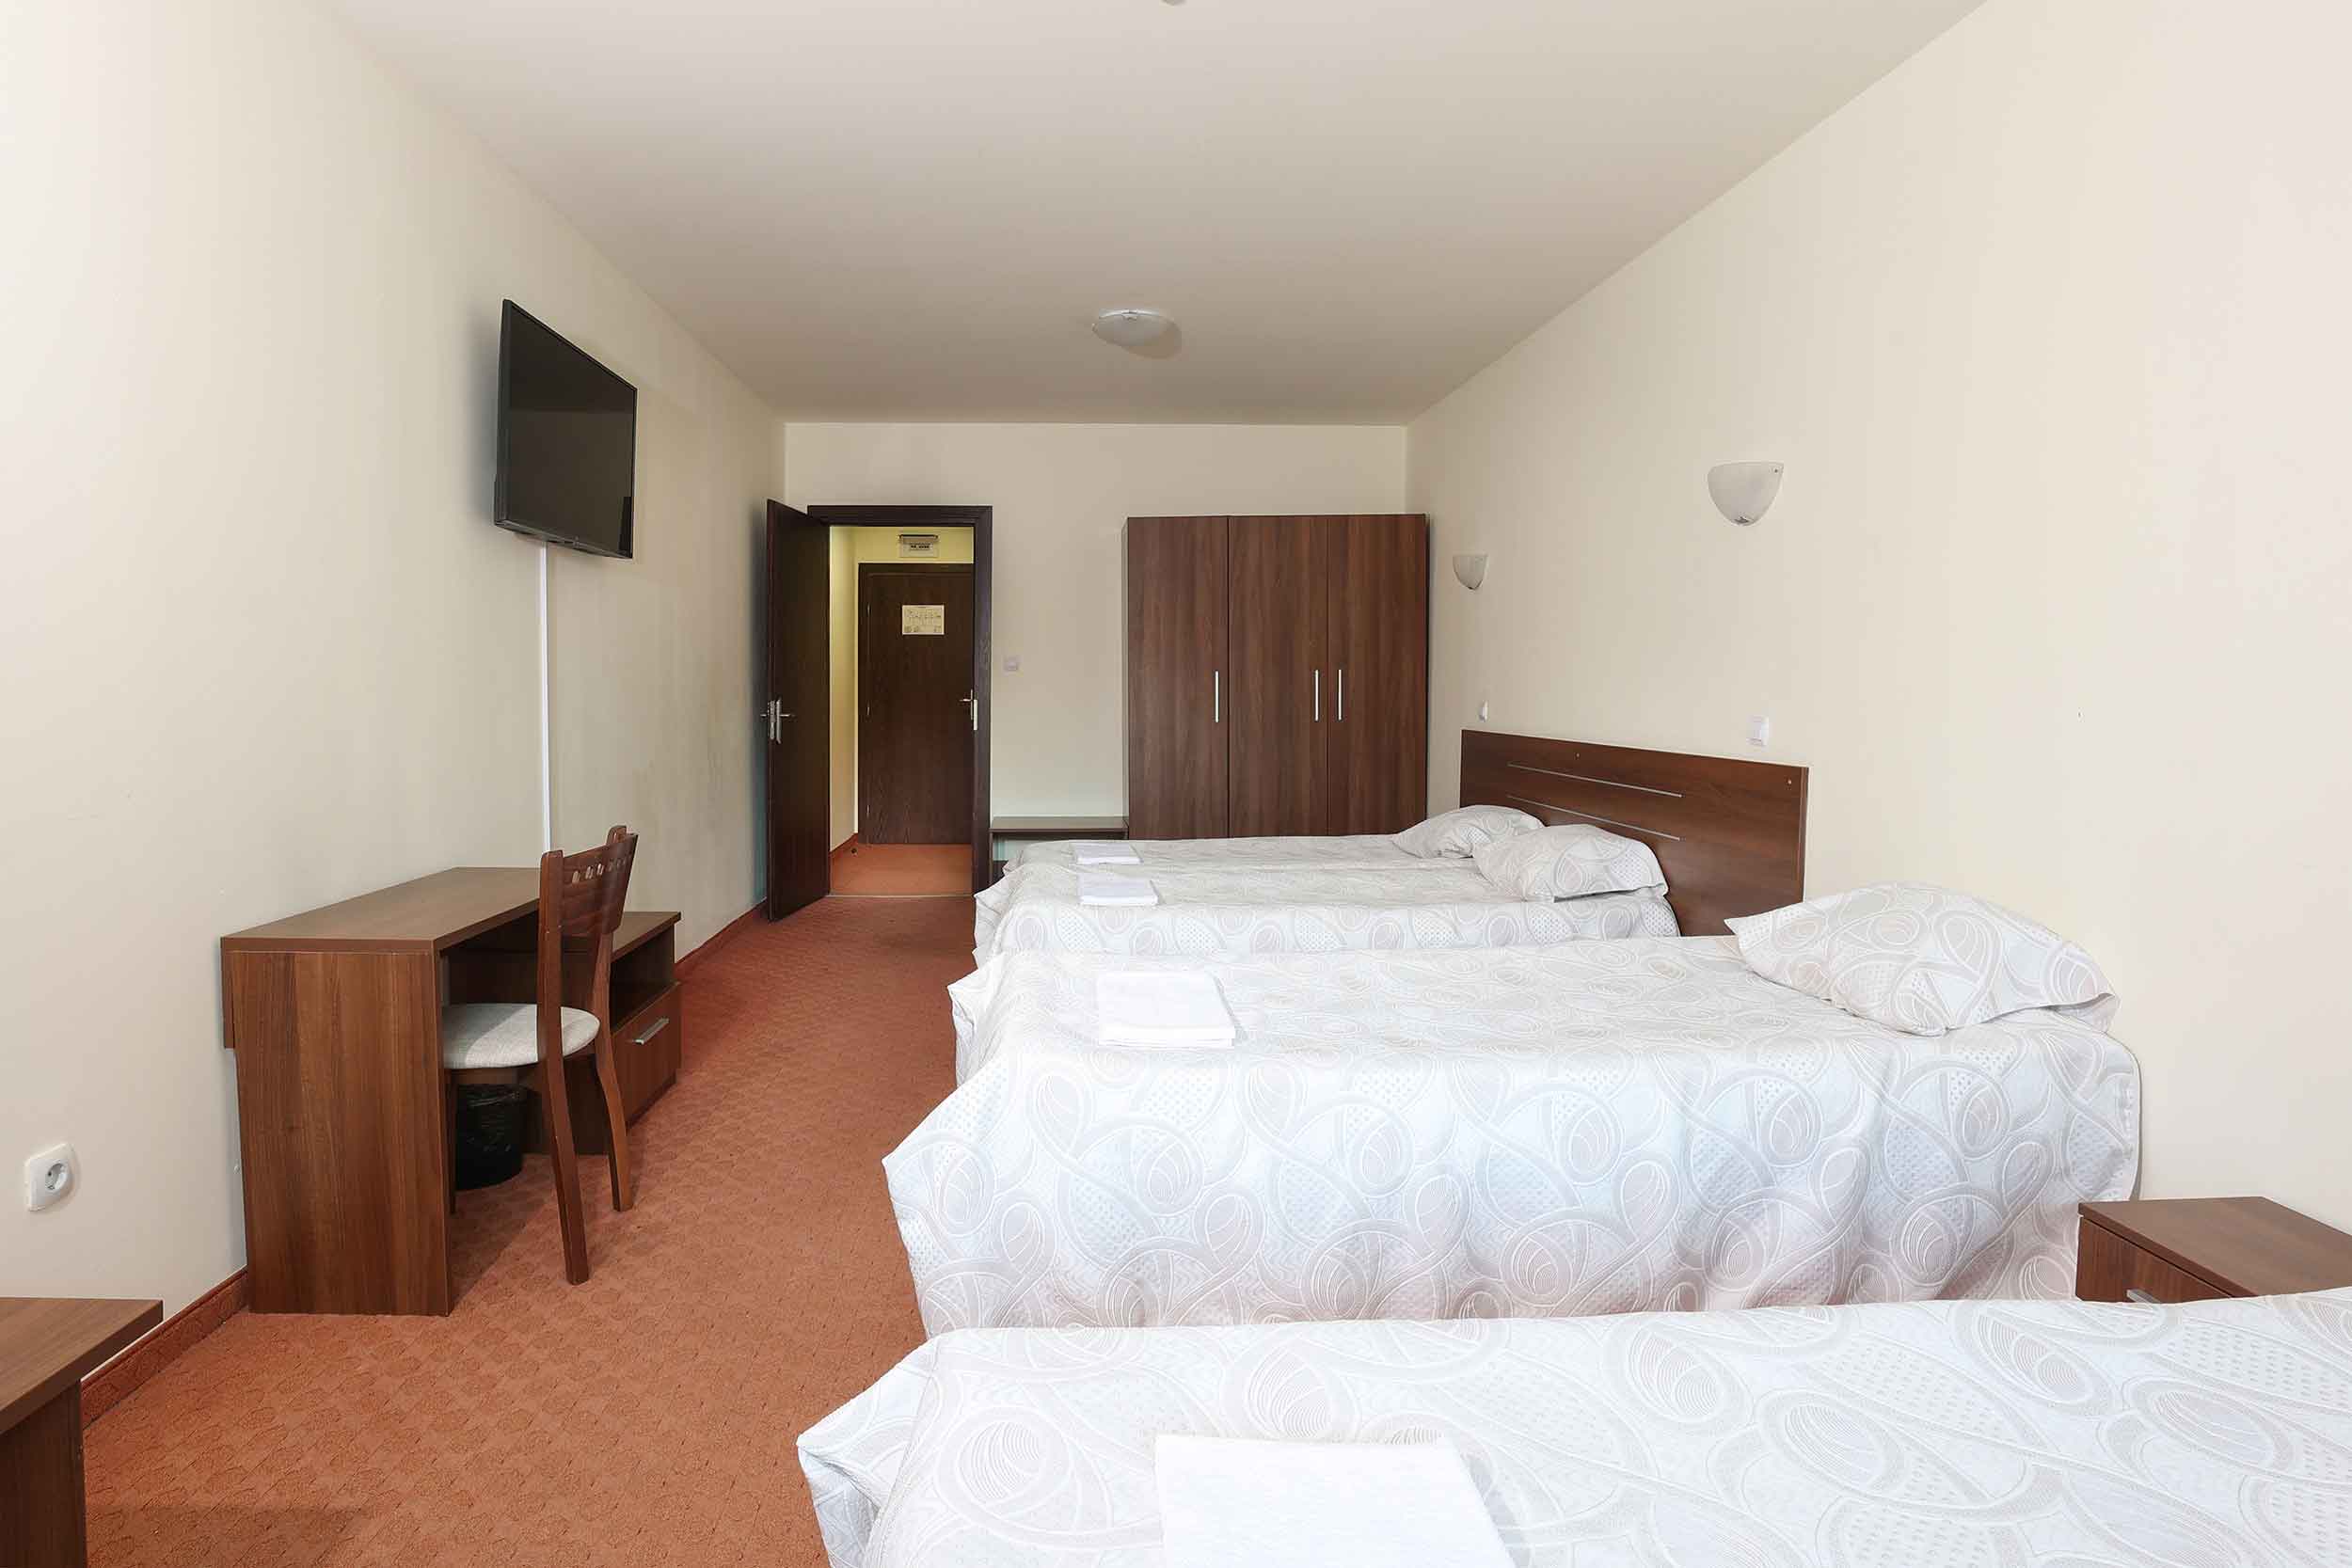 Quadruple room at Kartala hotel. In the picture there are one king size bed and two single beds. One desk, one chair, one cabinet and tv on the wall